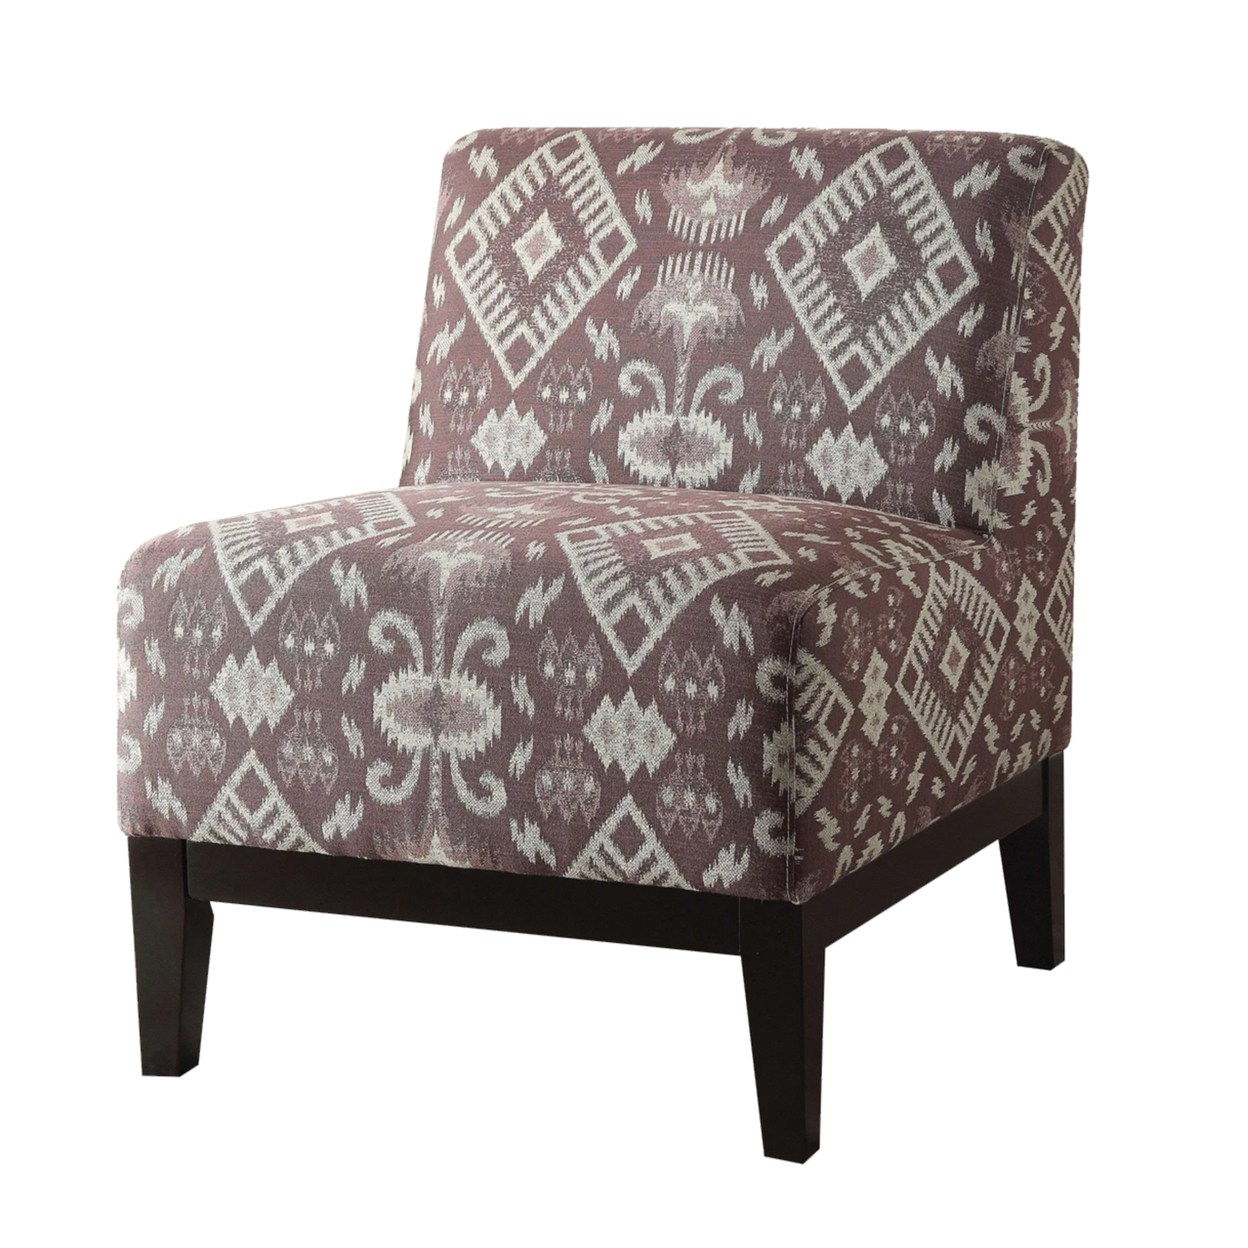 28 Inch Wide Fabric Upholstered Accent Chair, Brown, White- Saltoro Sherpi